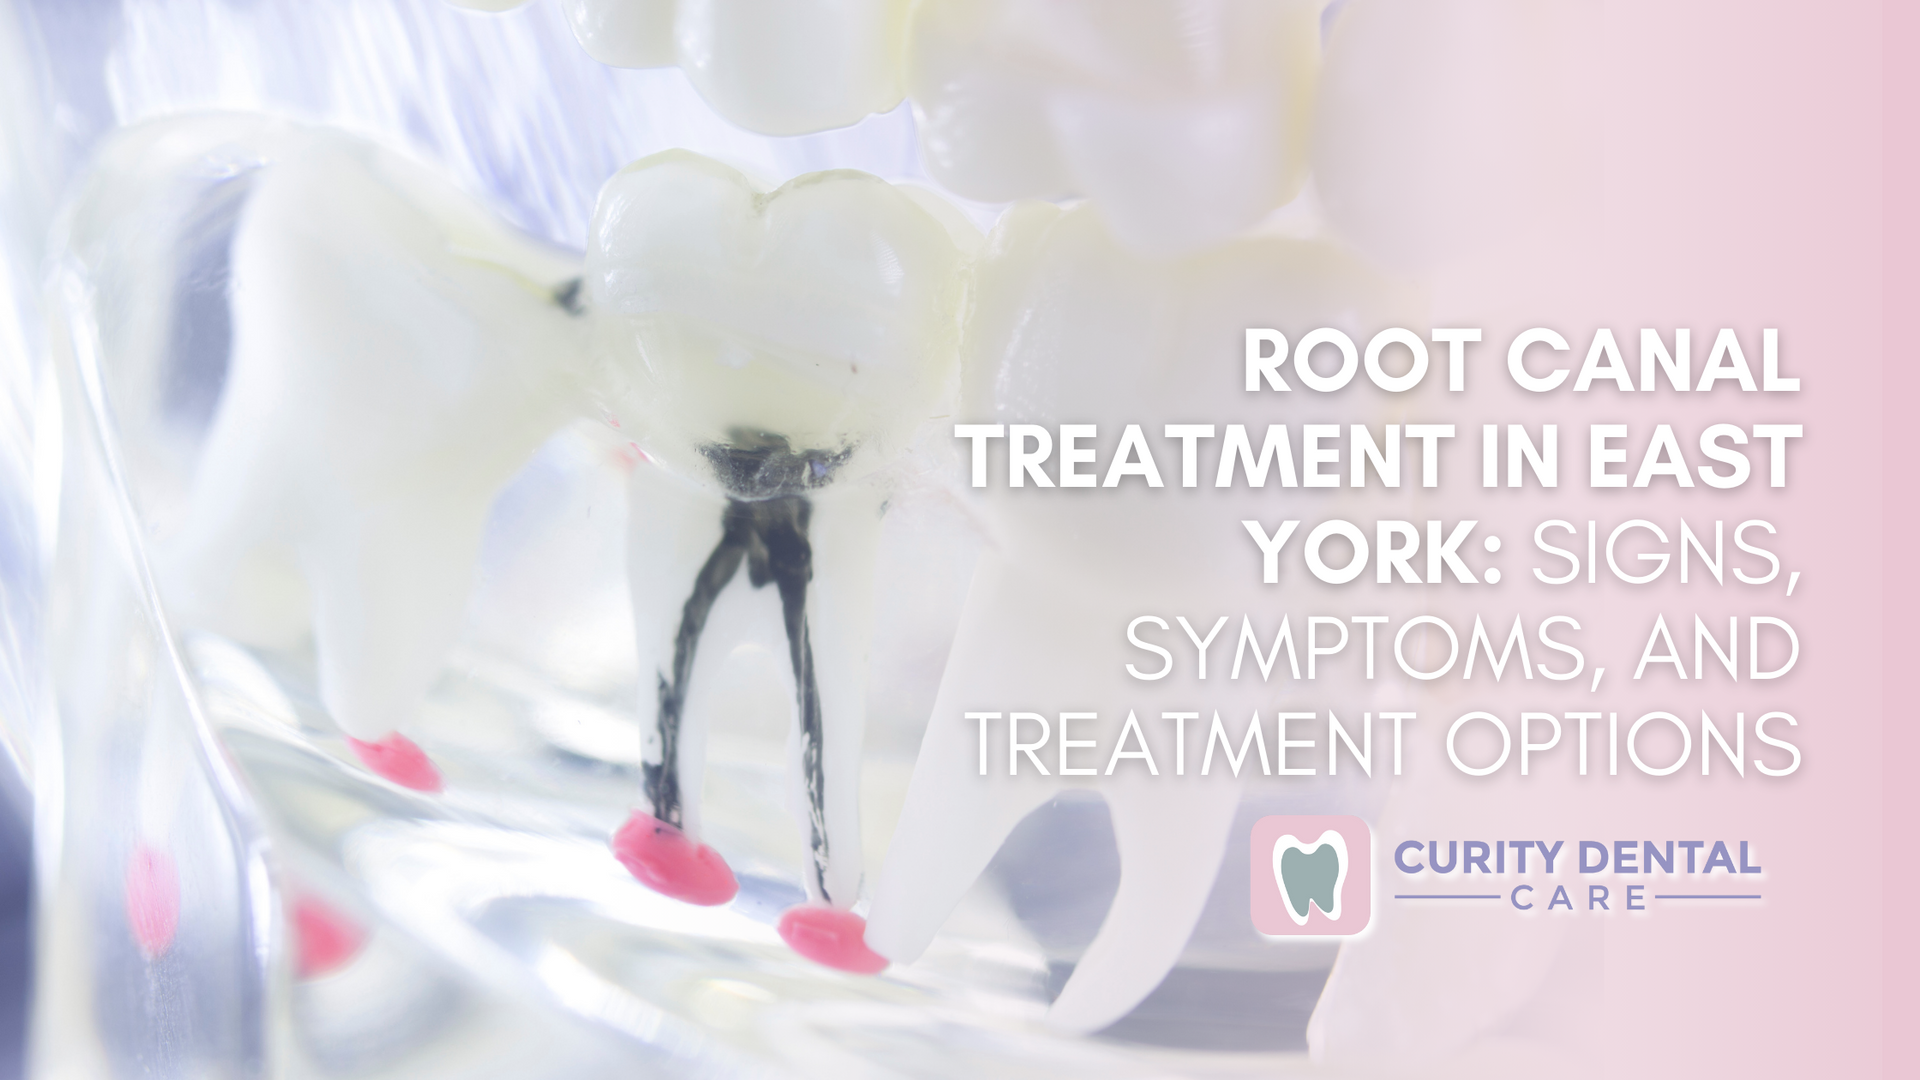 a root canal treatment in east york : signs , symptoms and treatment options